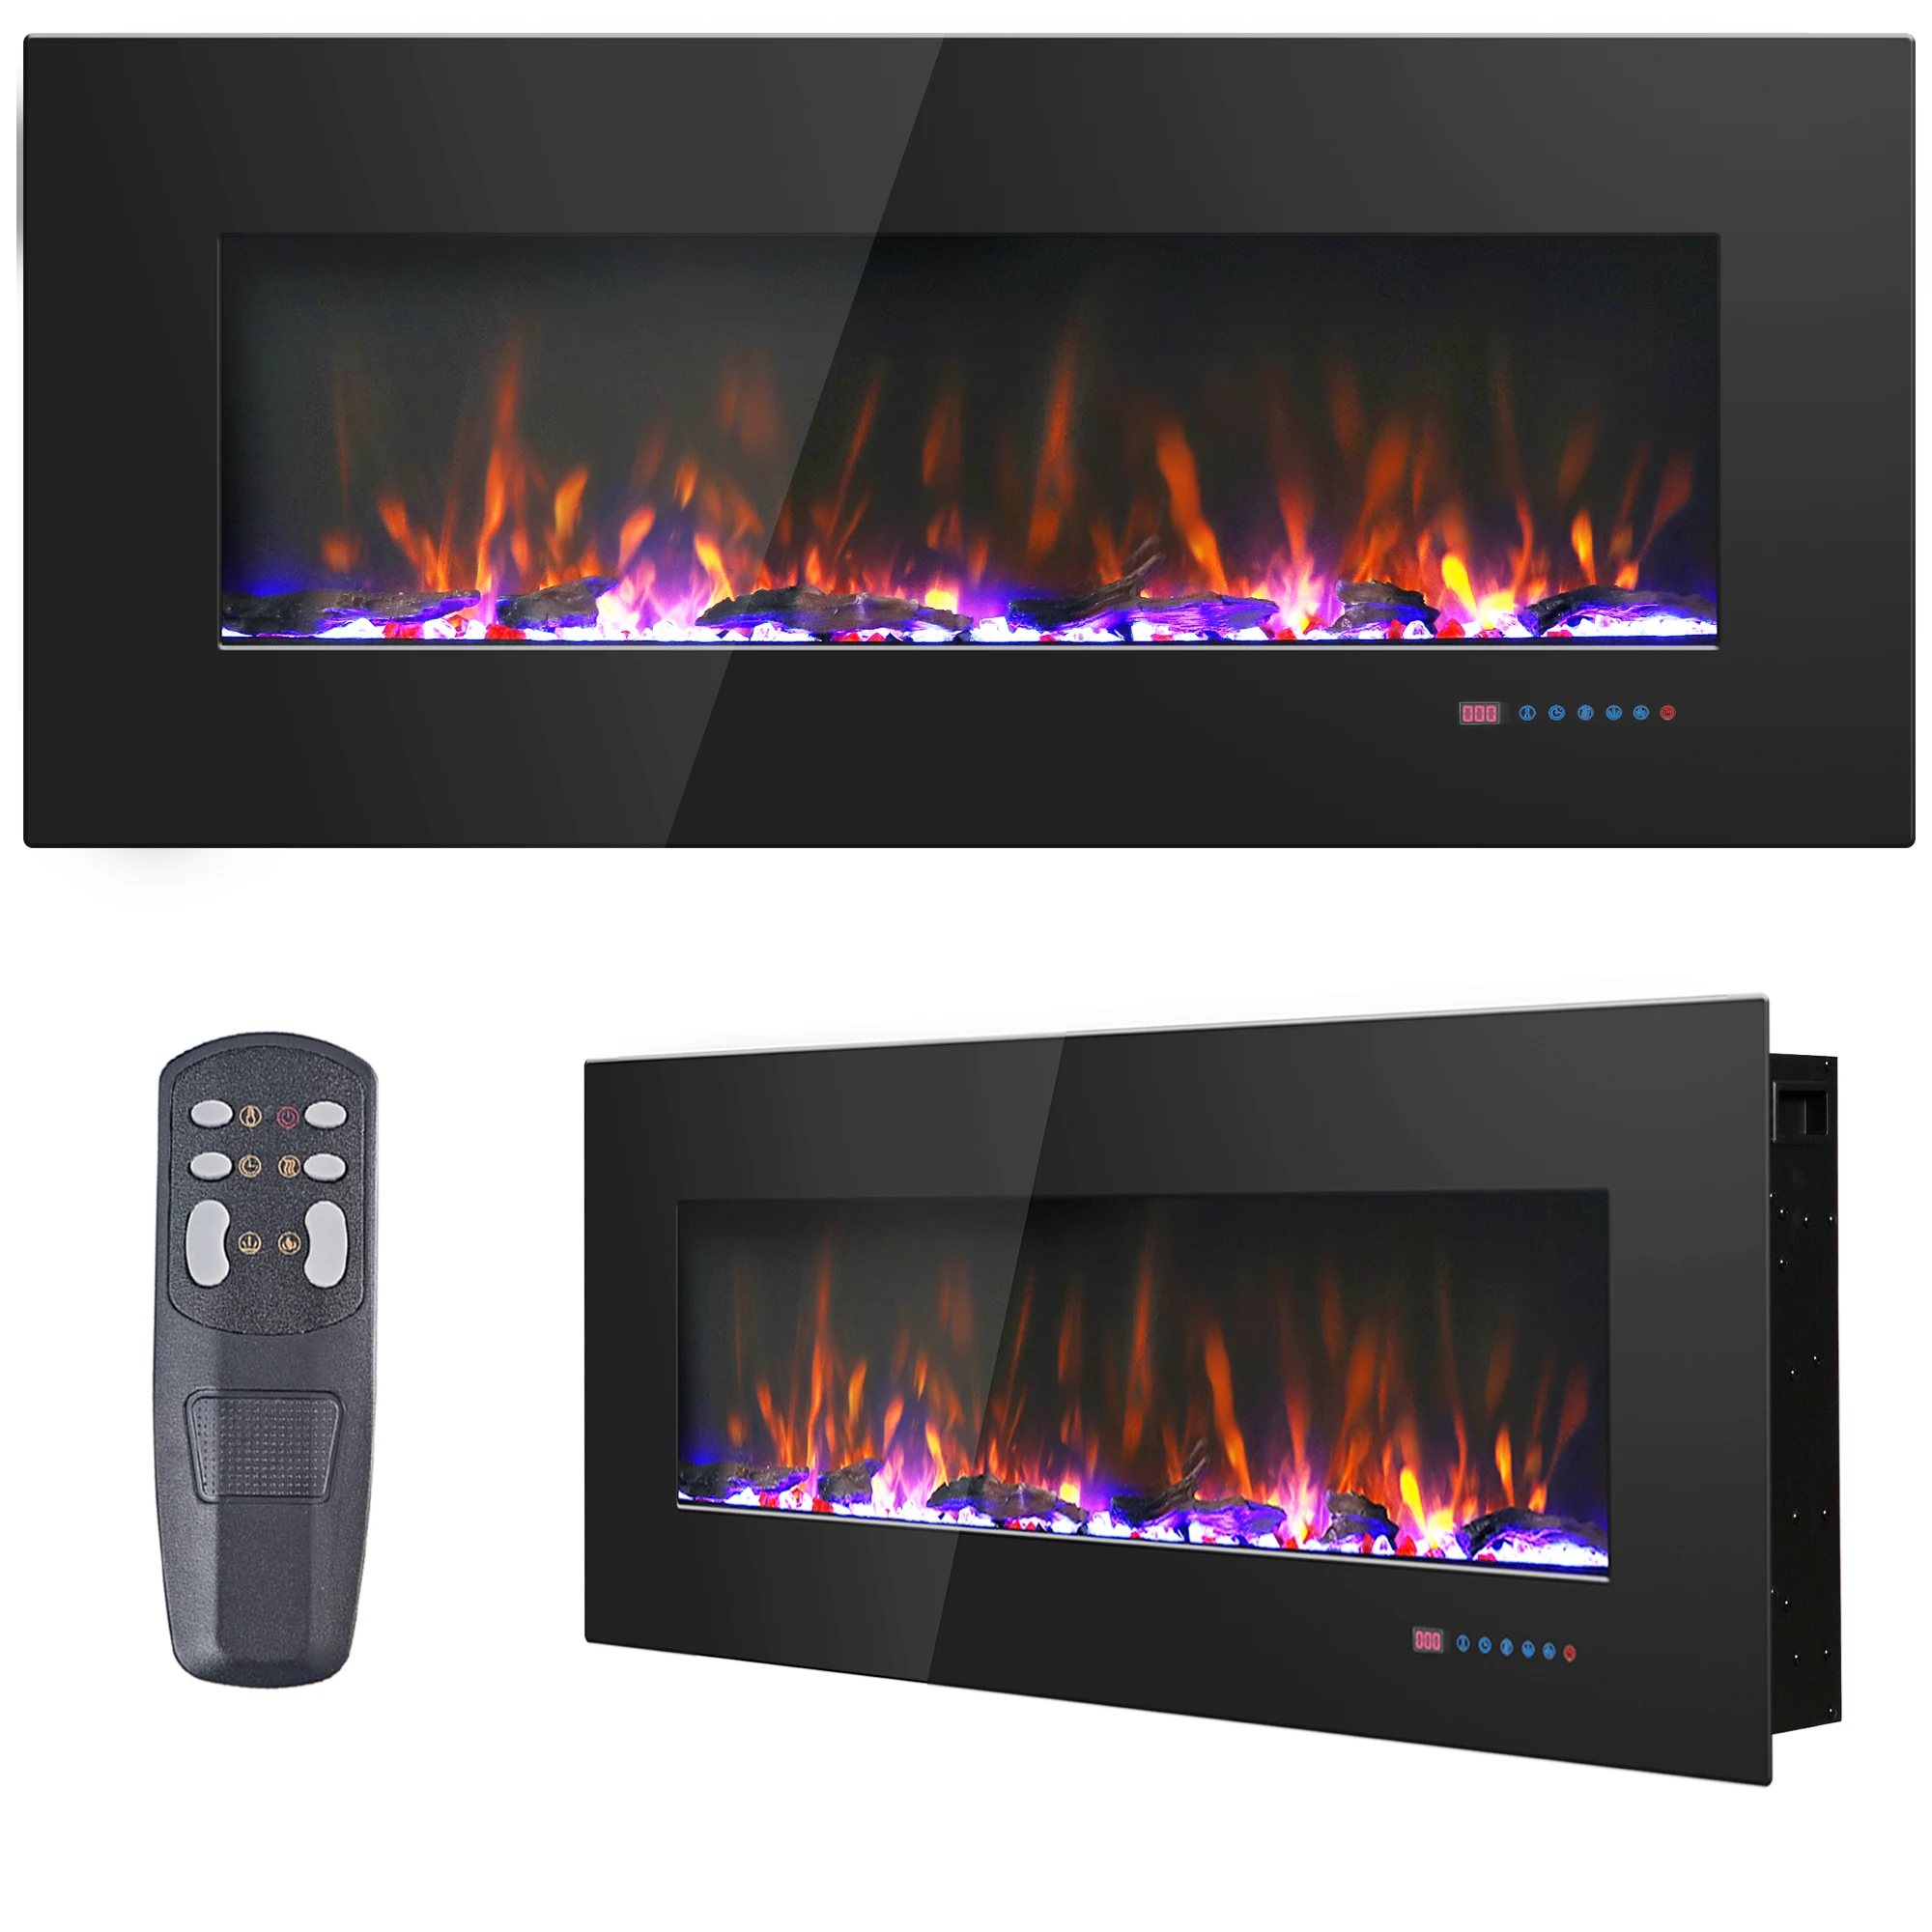 Luxstar 42 Inch Electric Fireplace Heaters Wall Mounted Fireplace Not for Recessed Log Crystal Decorative Fireplace